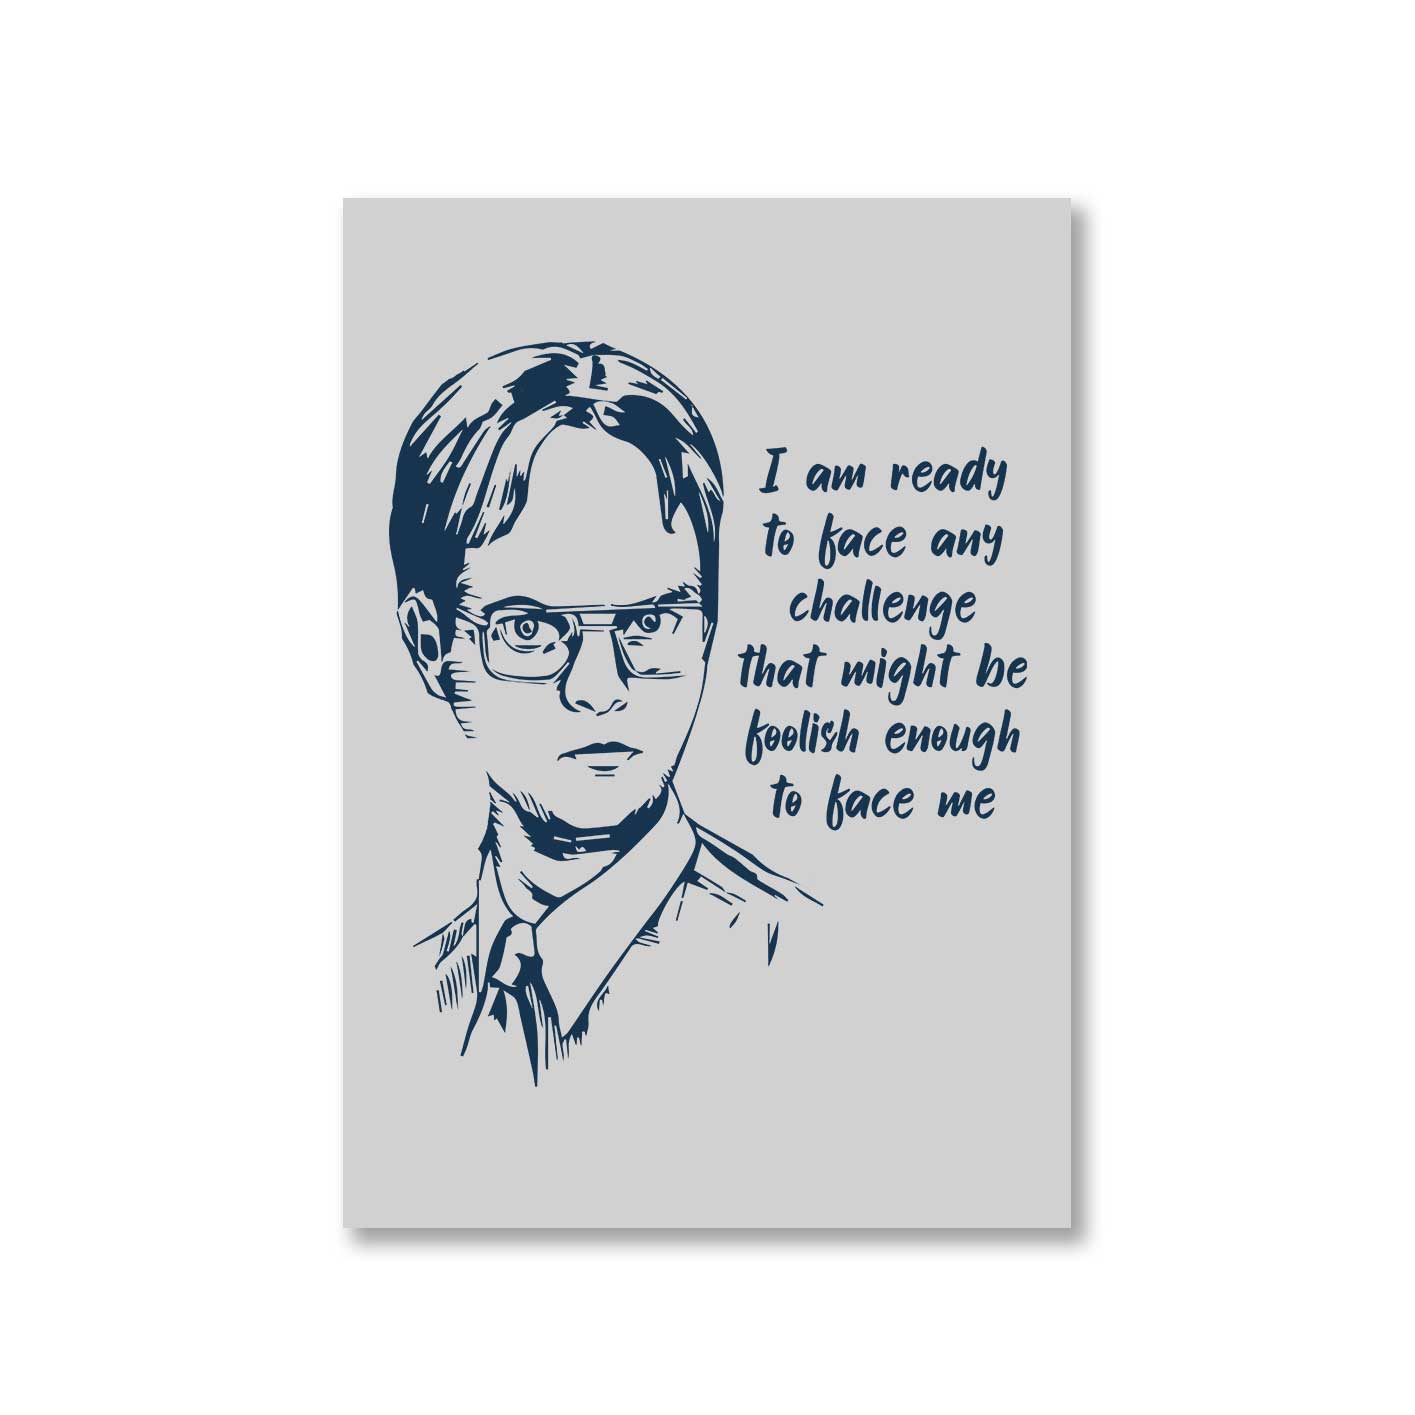 the office dwight poster wall art buy online united states of america usa the banyan tee tbt a4 - i am ready to face any challenge